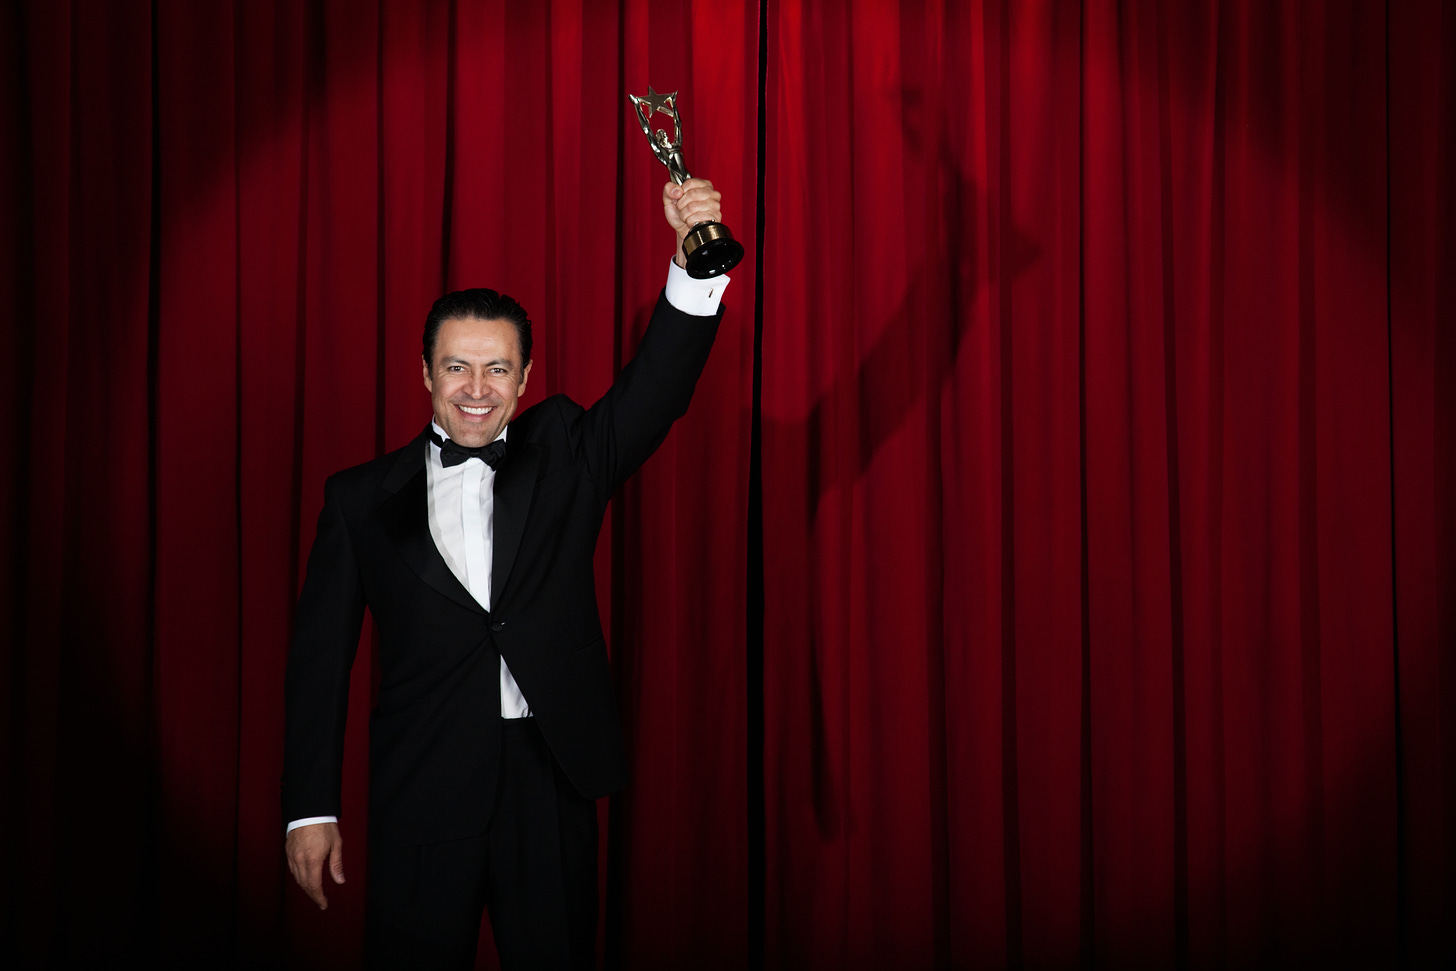 Man in tux on stage in front of red curtain holding Emmy statuette aloft with his left hand